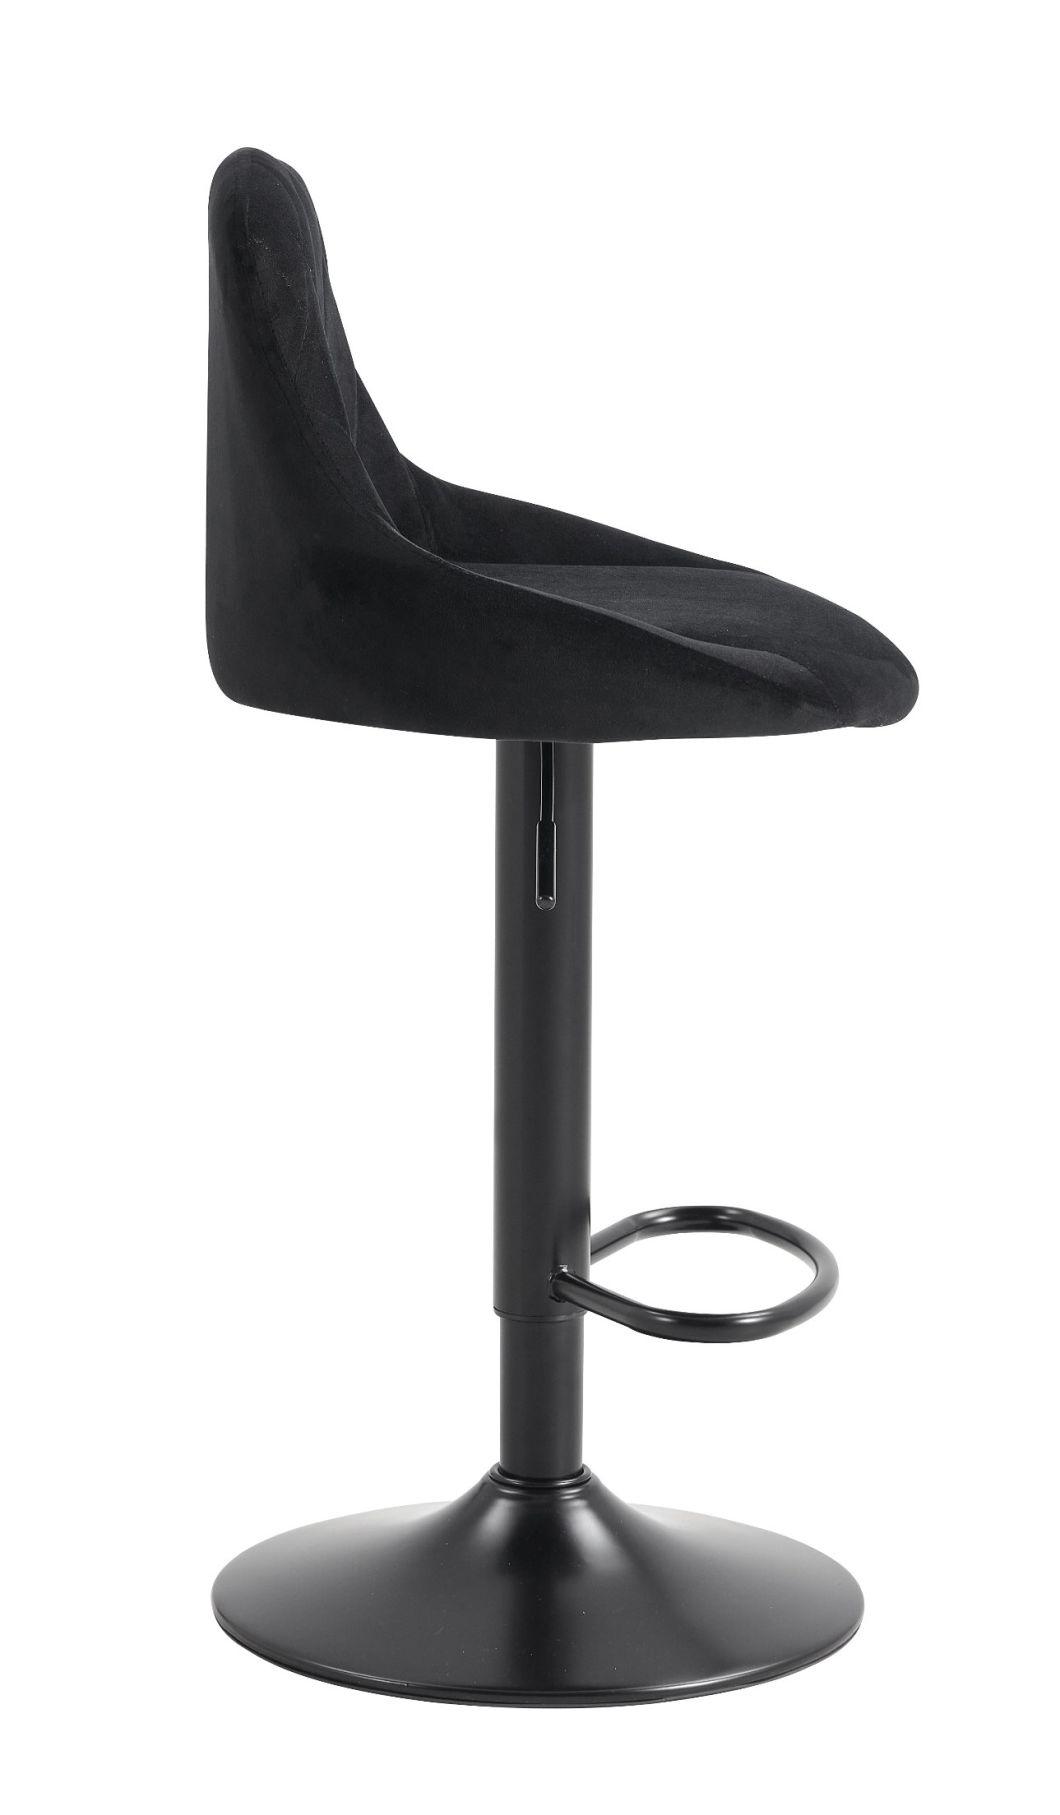 Modern Design Adjustable High Bar Counter Chair Leather Seat Bar Stool for Kitchen